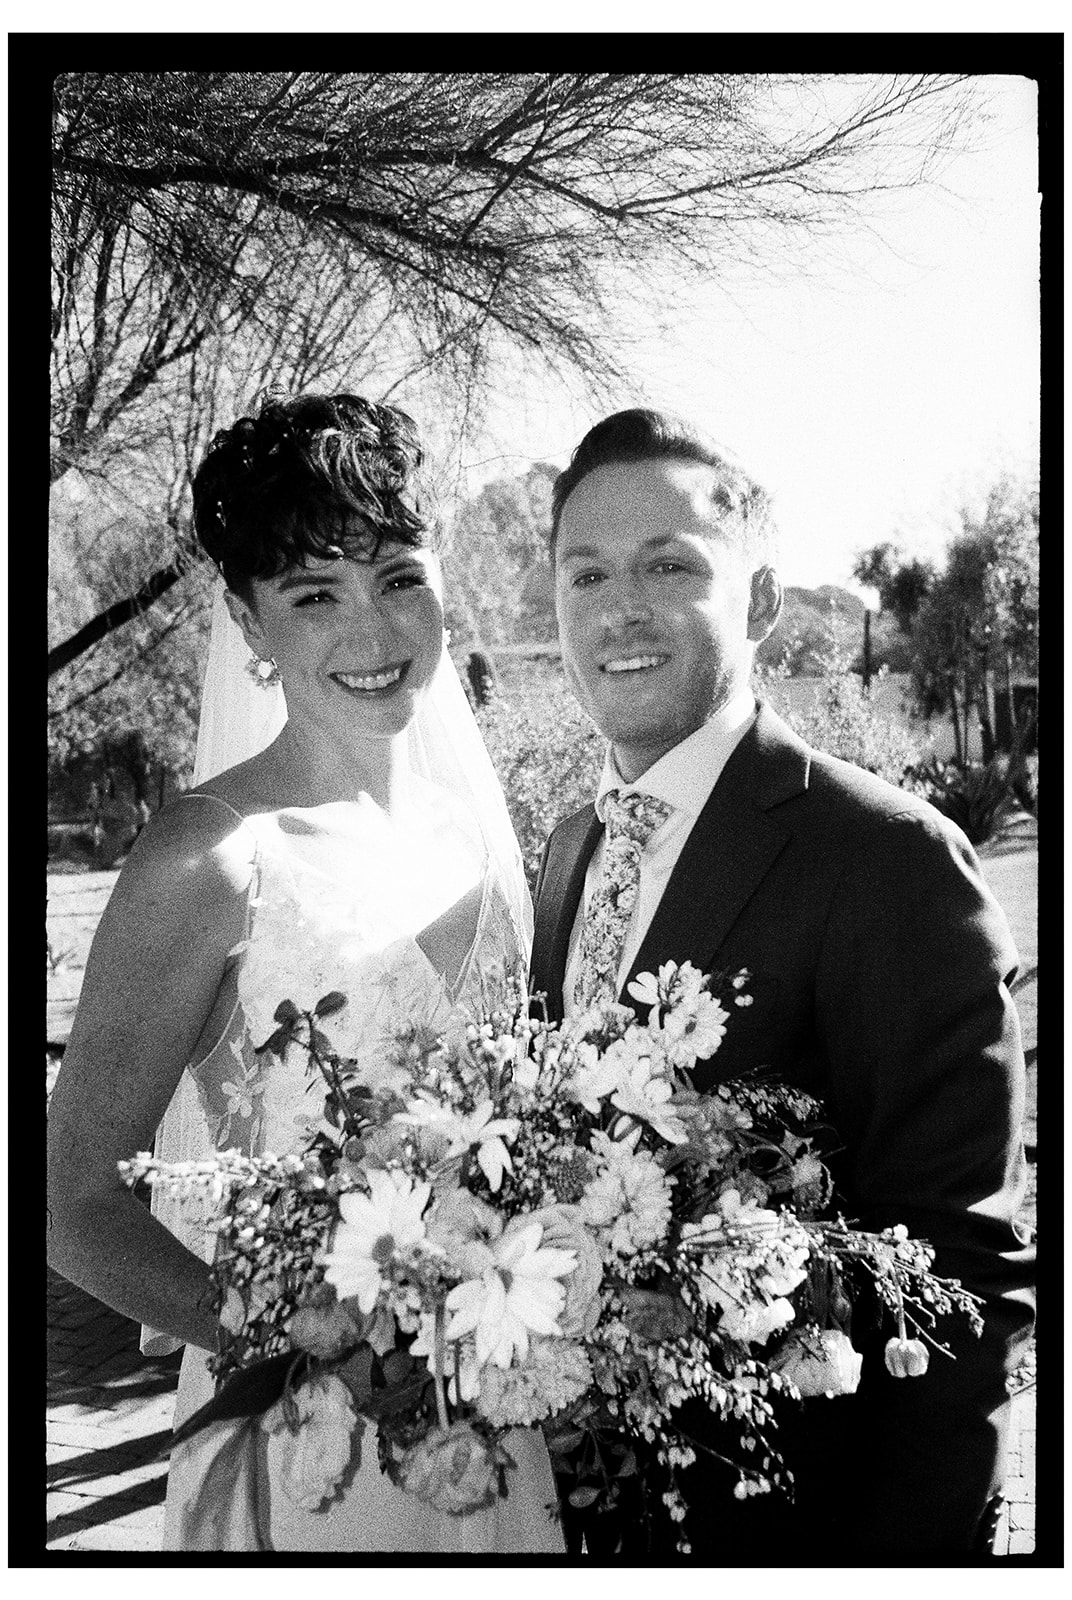 A bride and groom smile at each other outdoors. The bride holds a bouquet of flowers, and both are dressed in formal attire. Trees and tall plants are in the background.